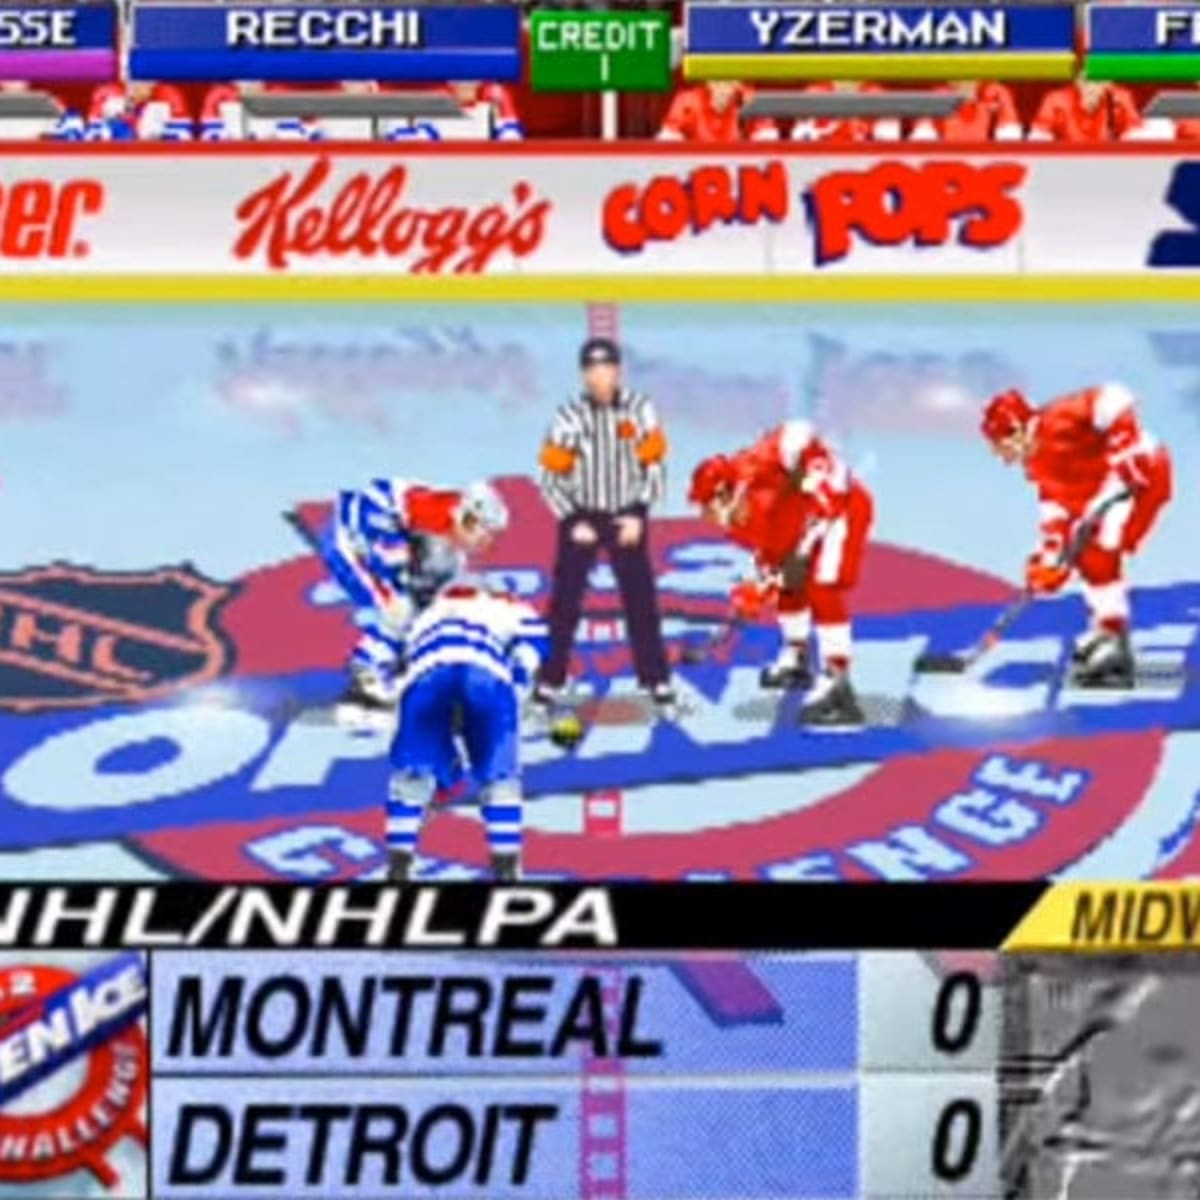 Old Time Hockey Is About To Be The Hottest Video Game Of 2017